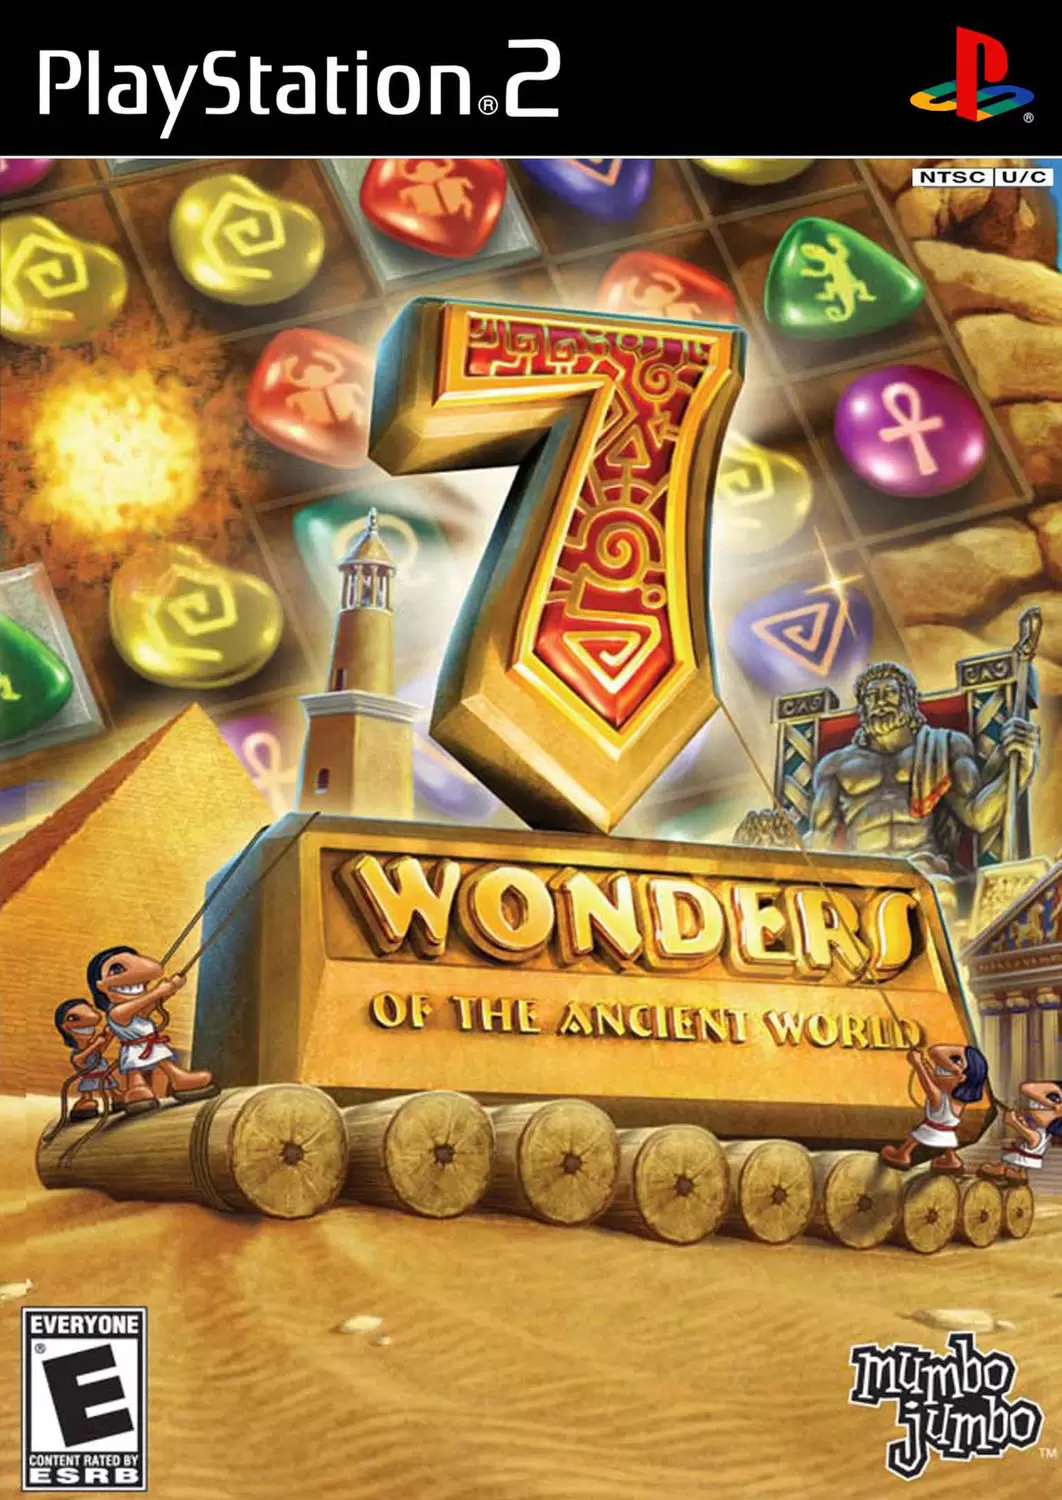 PS2 Games - 7 Wonders of the Ancient World